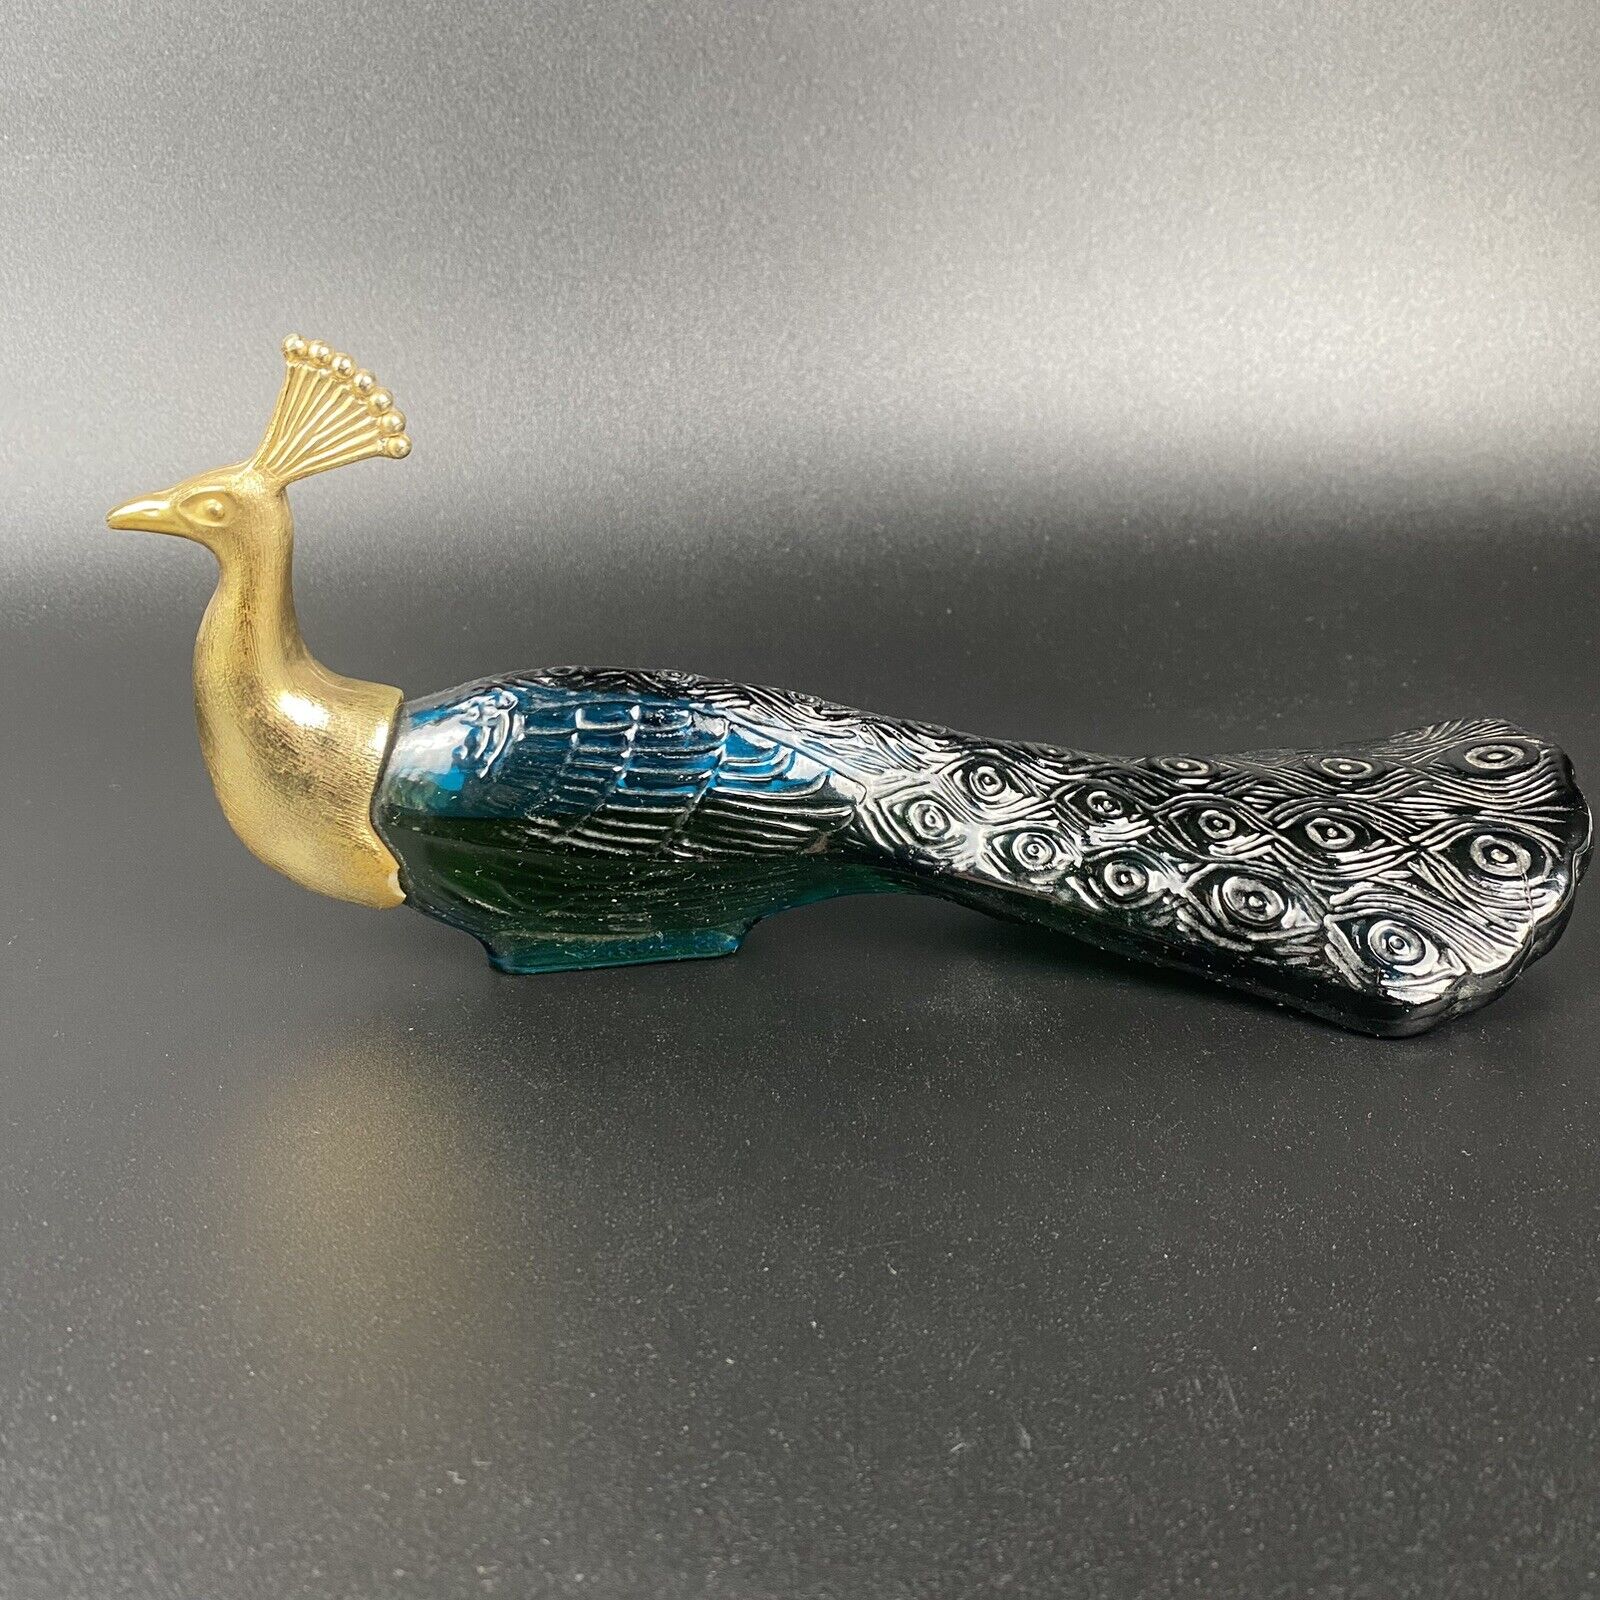 Vintage AVON Patchwork Cologne Peacock Green Tail Perfume Bottle Almost Full.